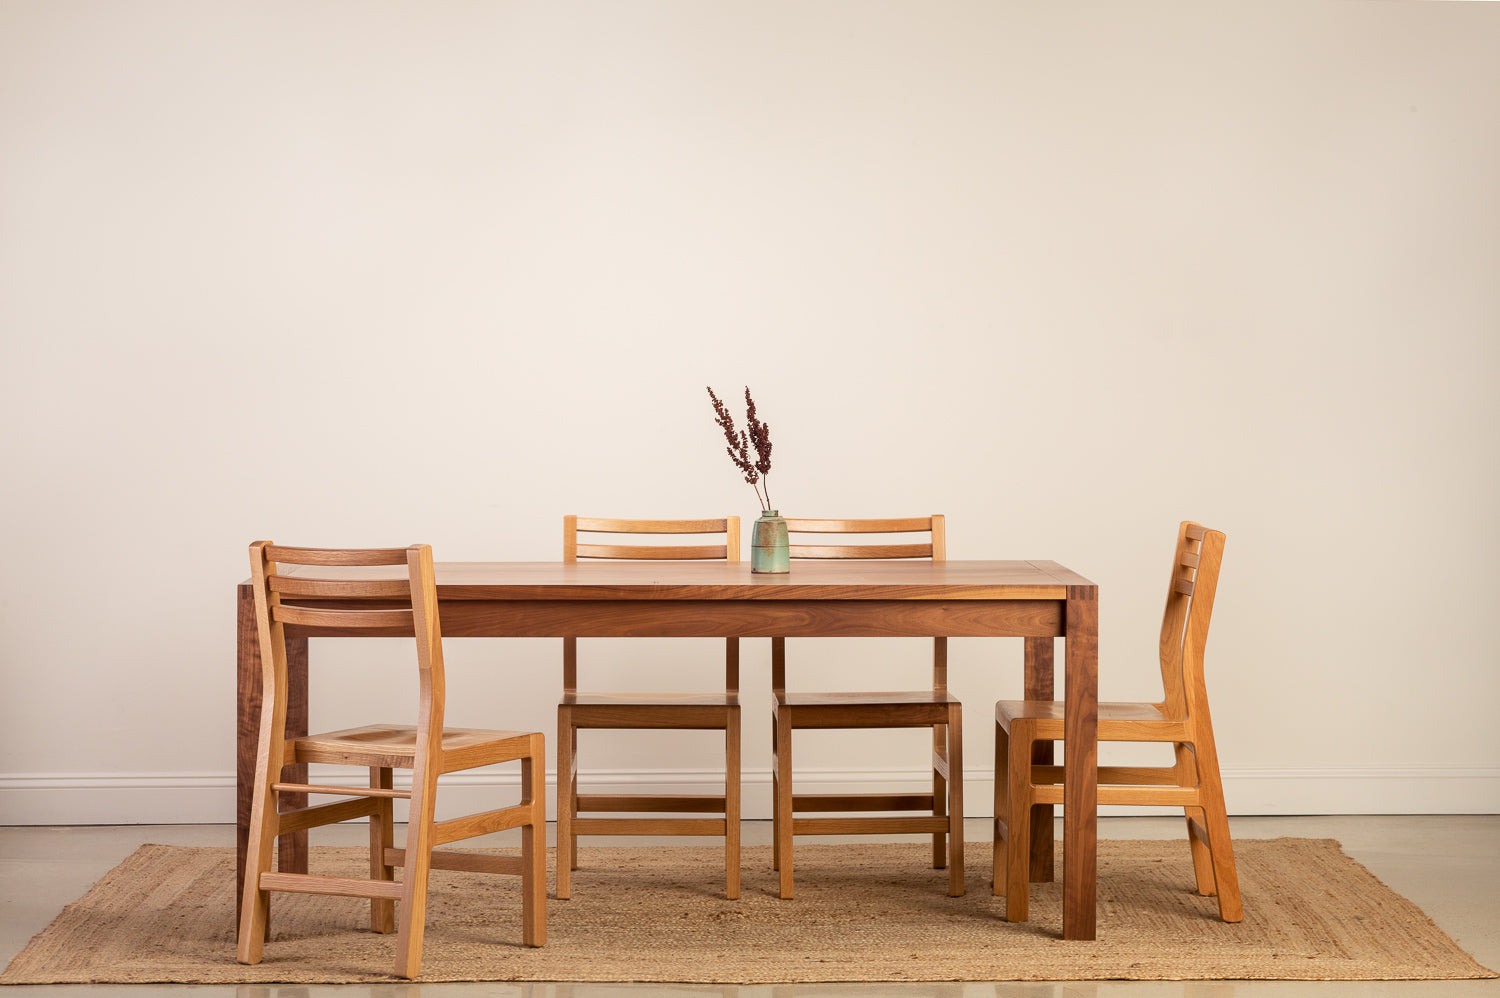 Chilton Furniture's solid white oak Dockside chairs with walnut Harbor Dining Table